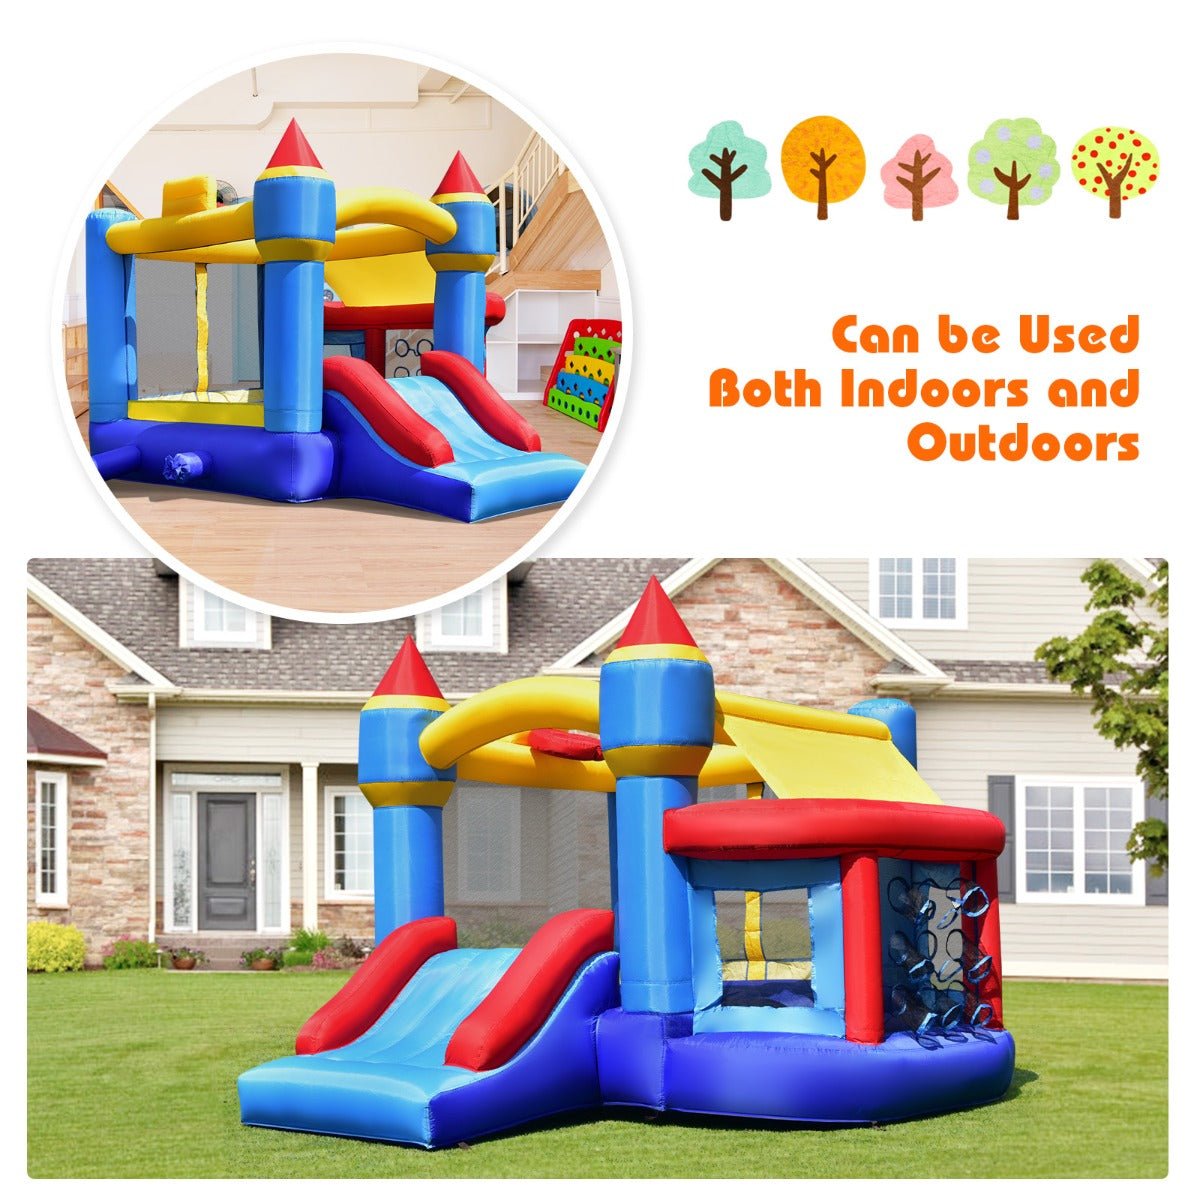 Active Childhood: Multifunctional Inflatable Bouncer with Slide (Blower Included)